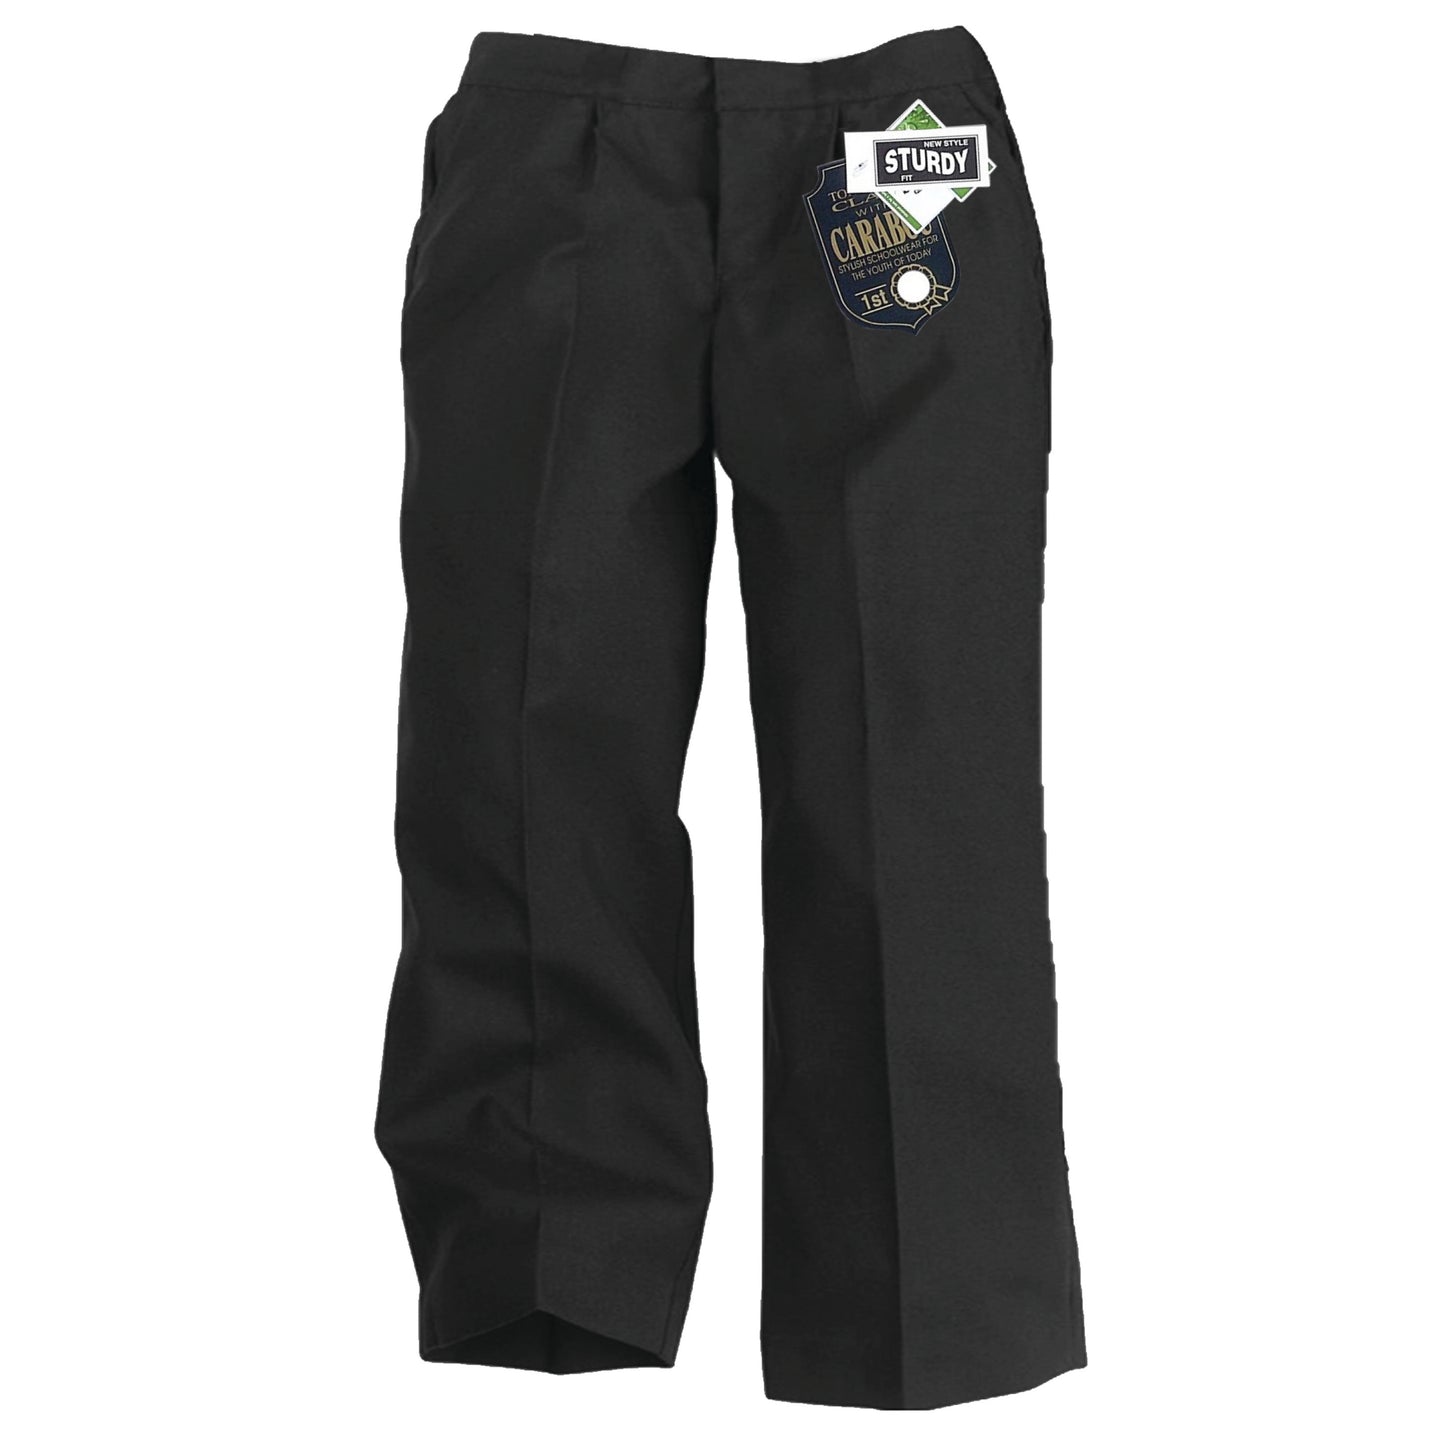 CARABOU BOYS STURDY FIT SCHOOL TROUSERS